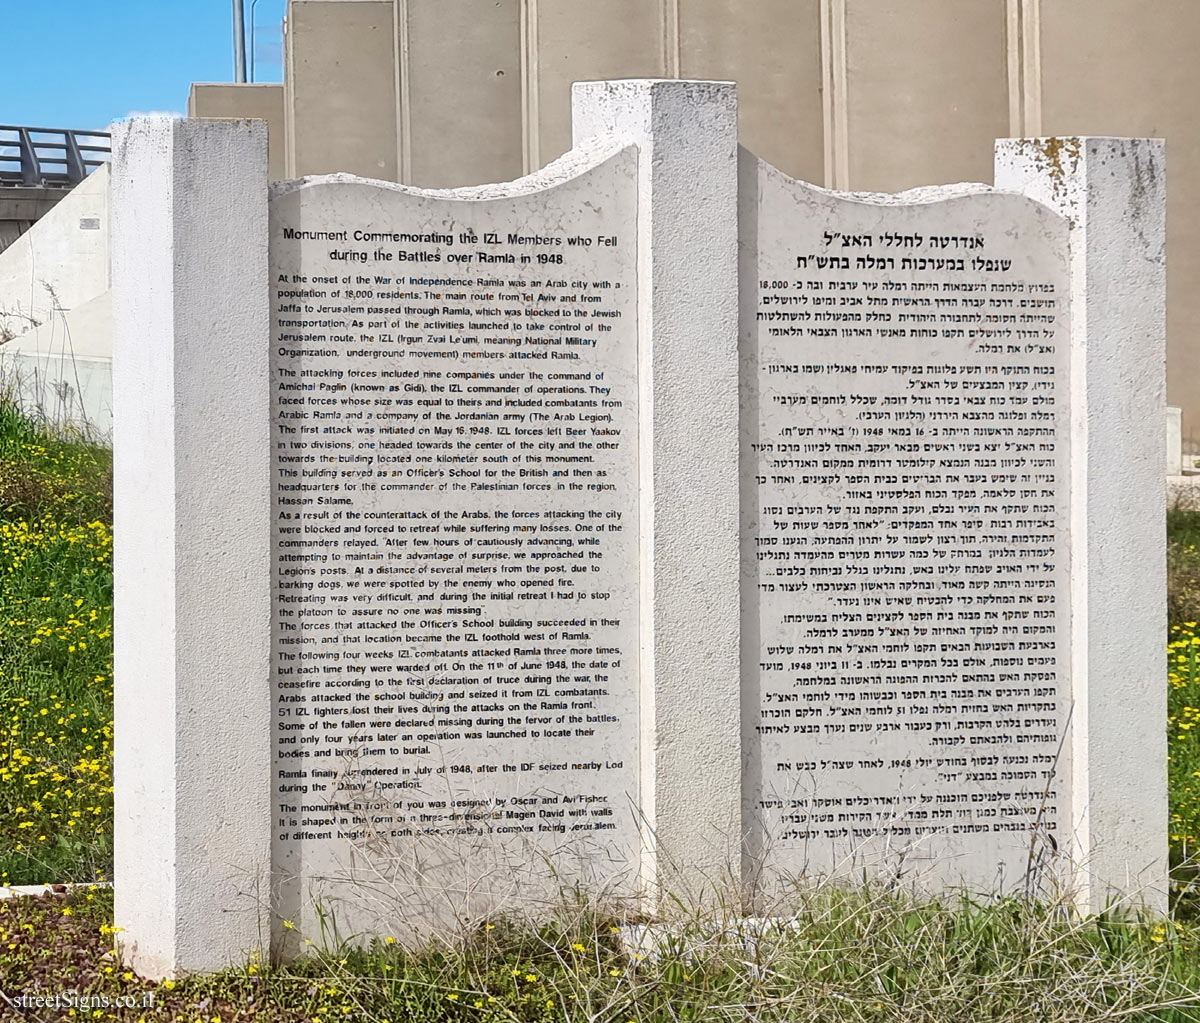 Ramla - Monument Commemorating the IZL Members who fell during the battles over Ramla in 1948